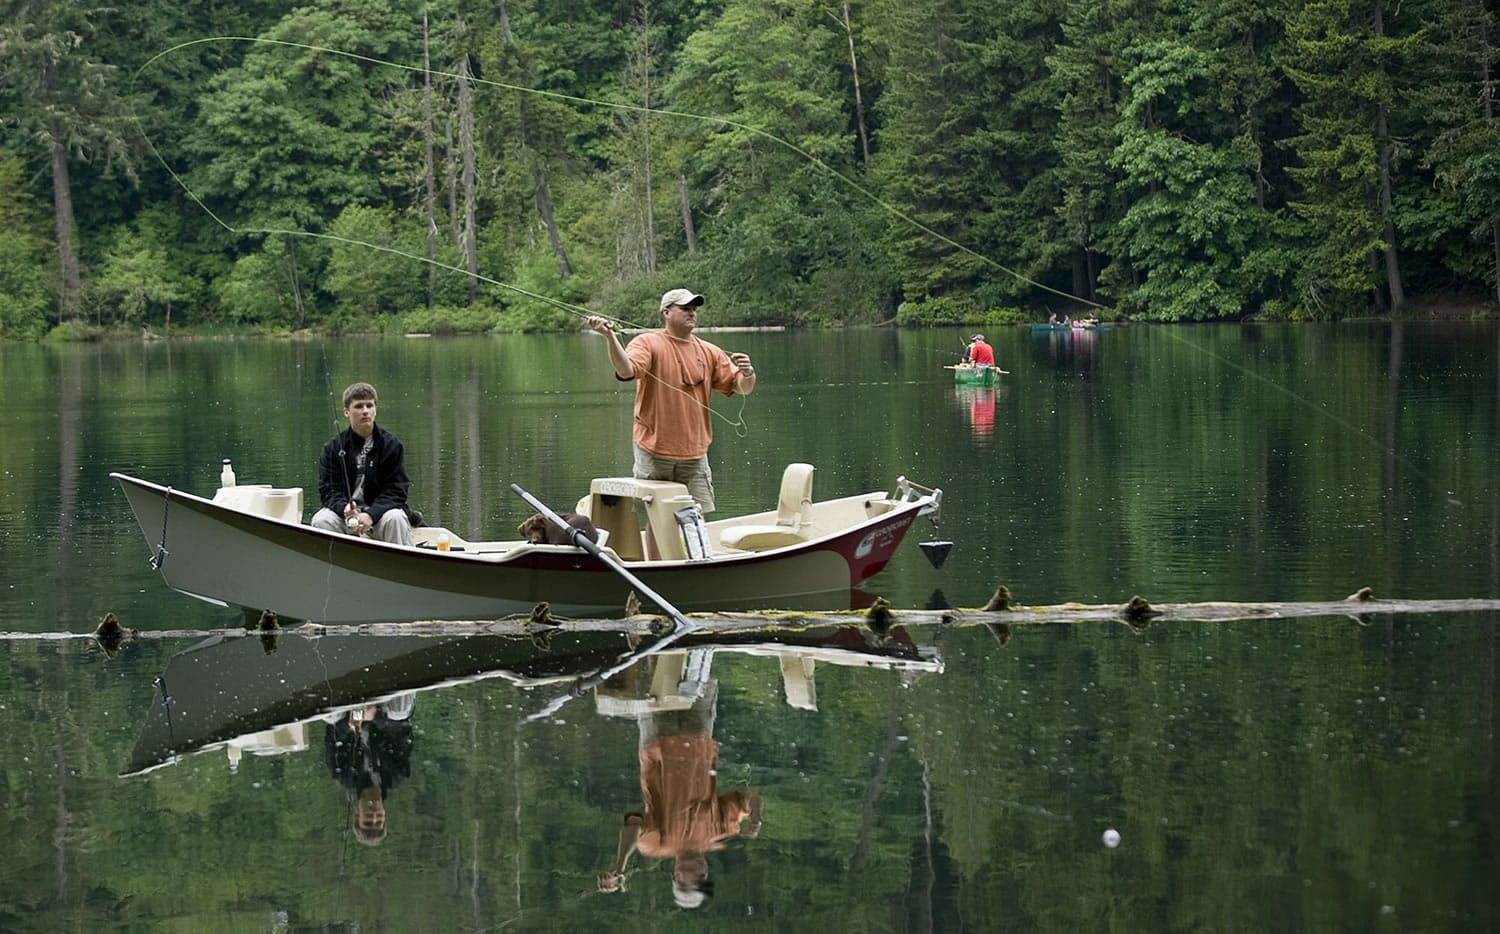 Jeff Picard, right, and his son, Caleb, 14, of Hockinson find the fishing relaxing Sunday at Battle Ground Lake.